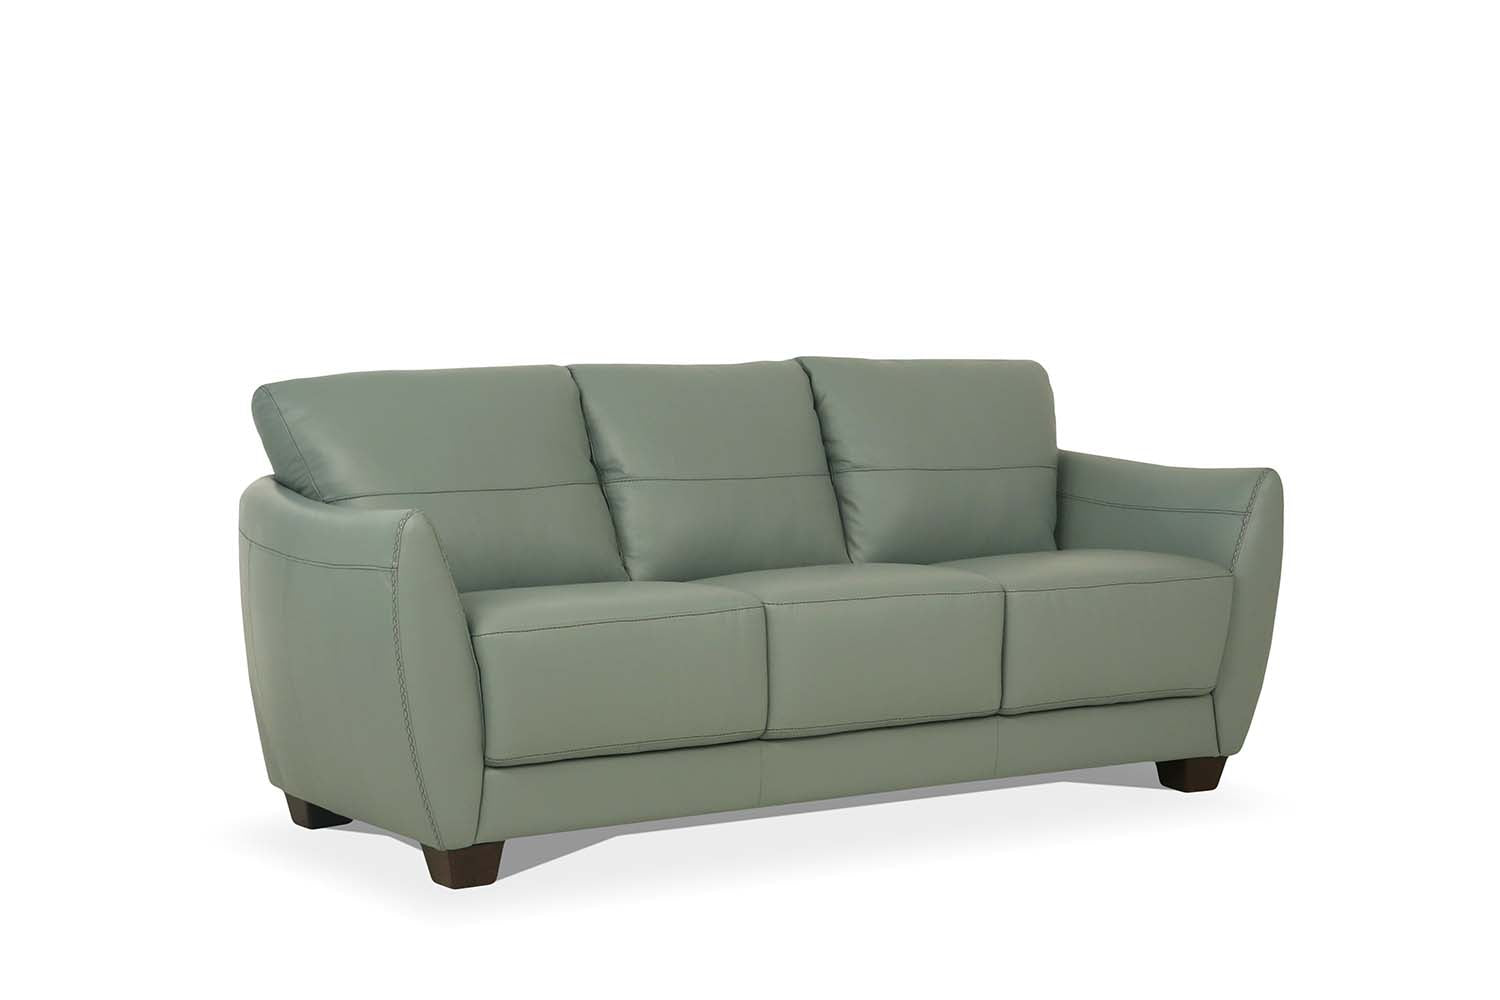 ACME Furniture Sofas & Couches - Sofa, Watery Leather 54950